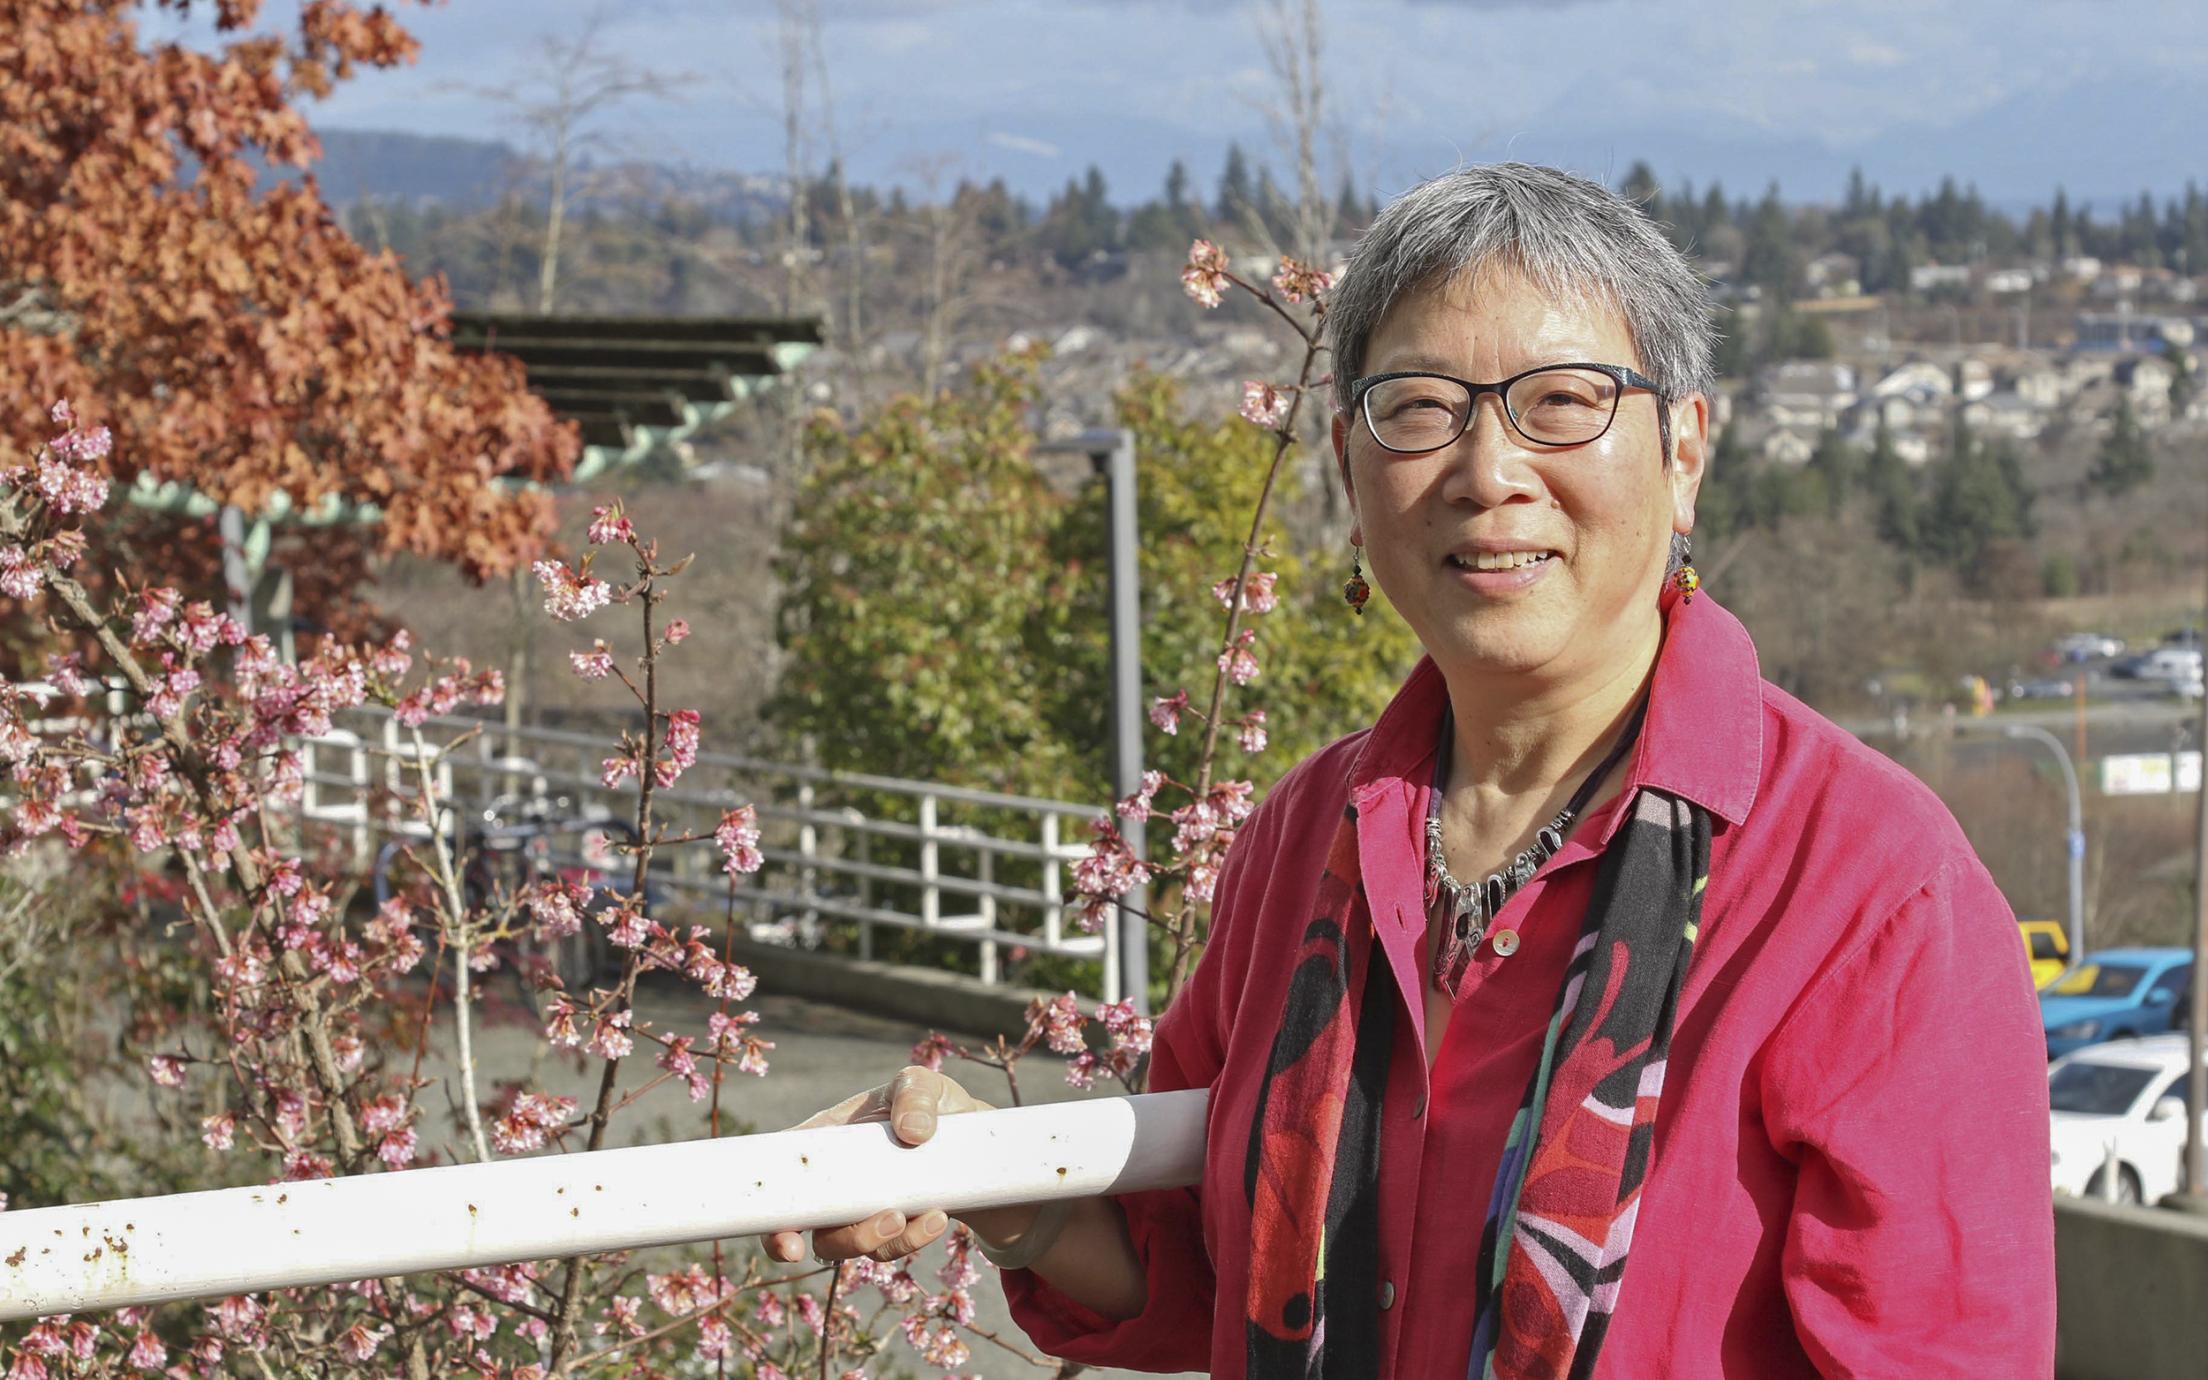 Dr. Imogene Lim stands along a guard rail with the Nanaimo cityscape in the background.